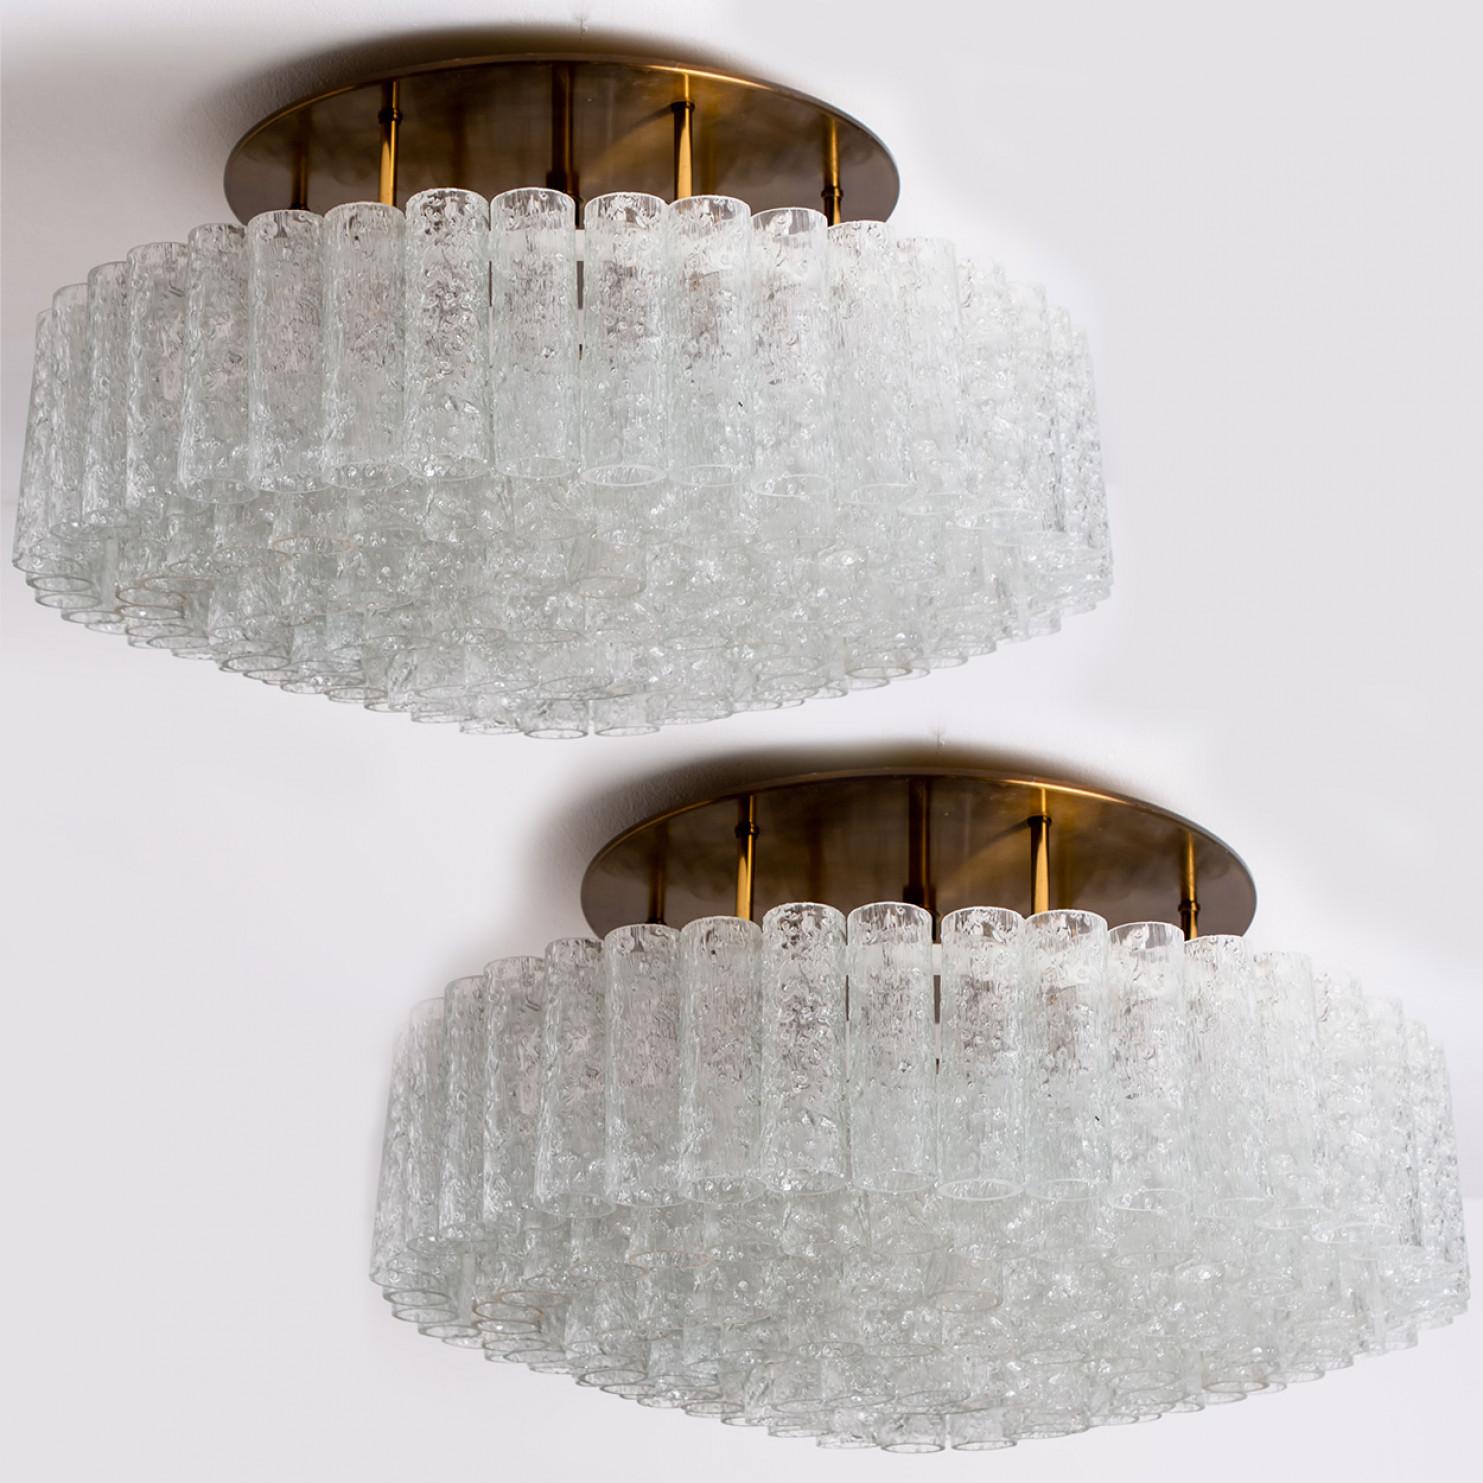 Austrian One of the Two Large Blown Glass Brass Flush Mount Light Fixtures by Doria 1960s For Sale